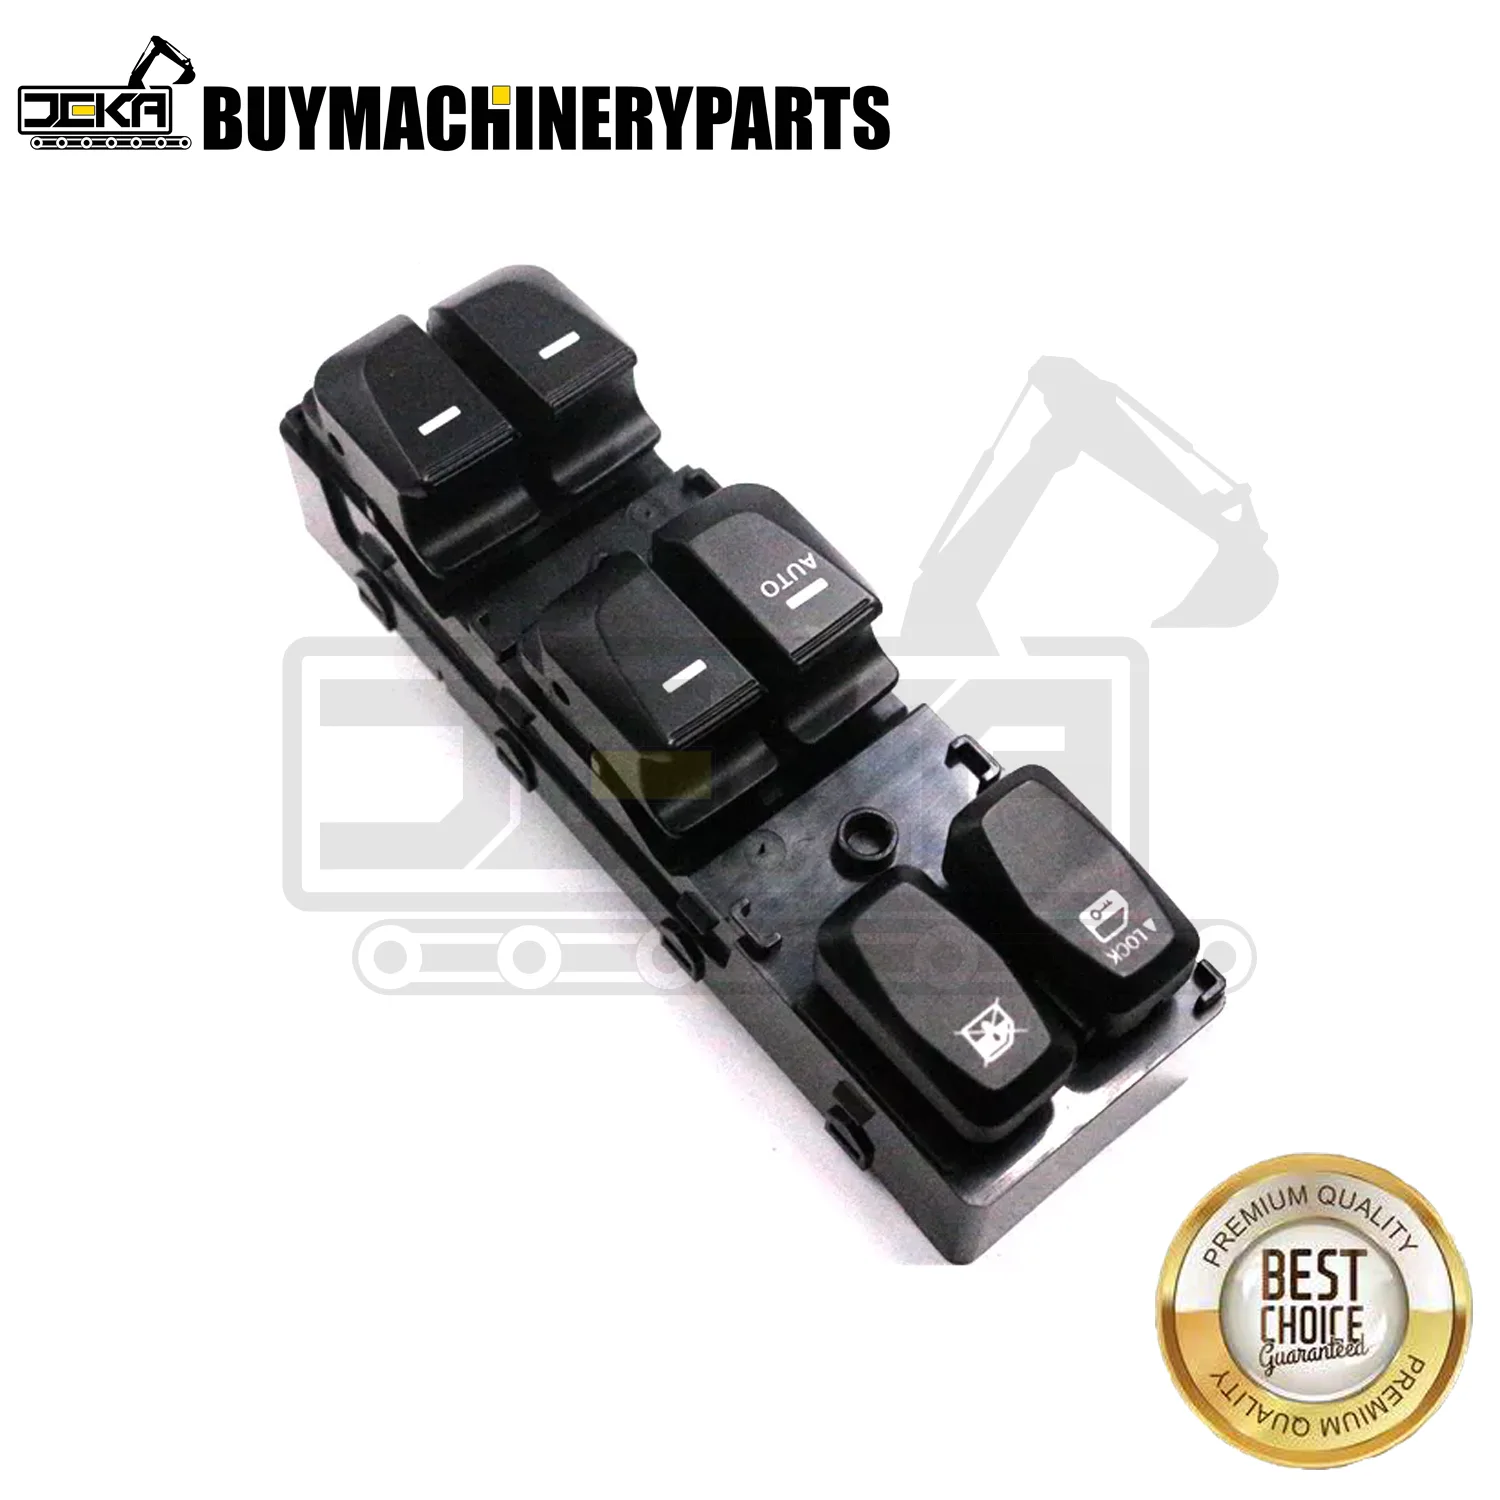 

New 16 Pins Left Hand Driver Side Window Switch Control For Hyundai IX35 Tucson 2010-2015 93570-2S010 935702S010 93570-2Z000